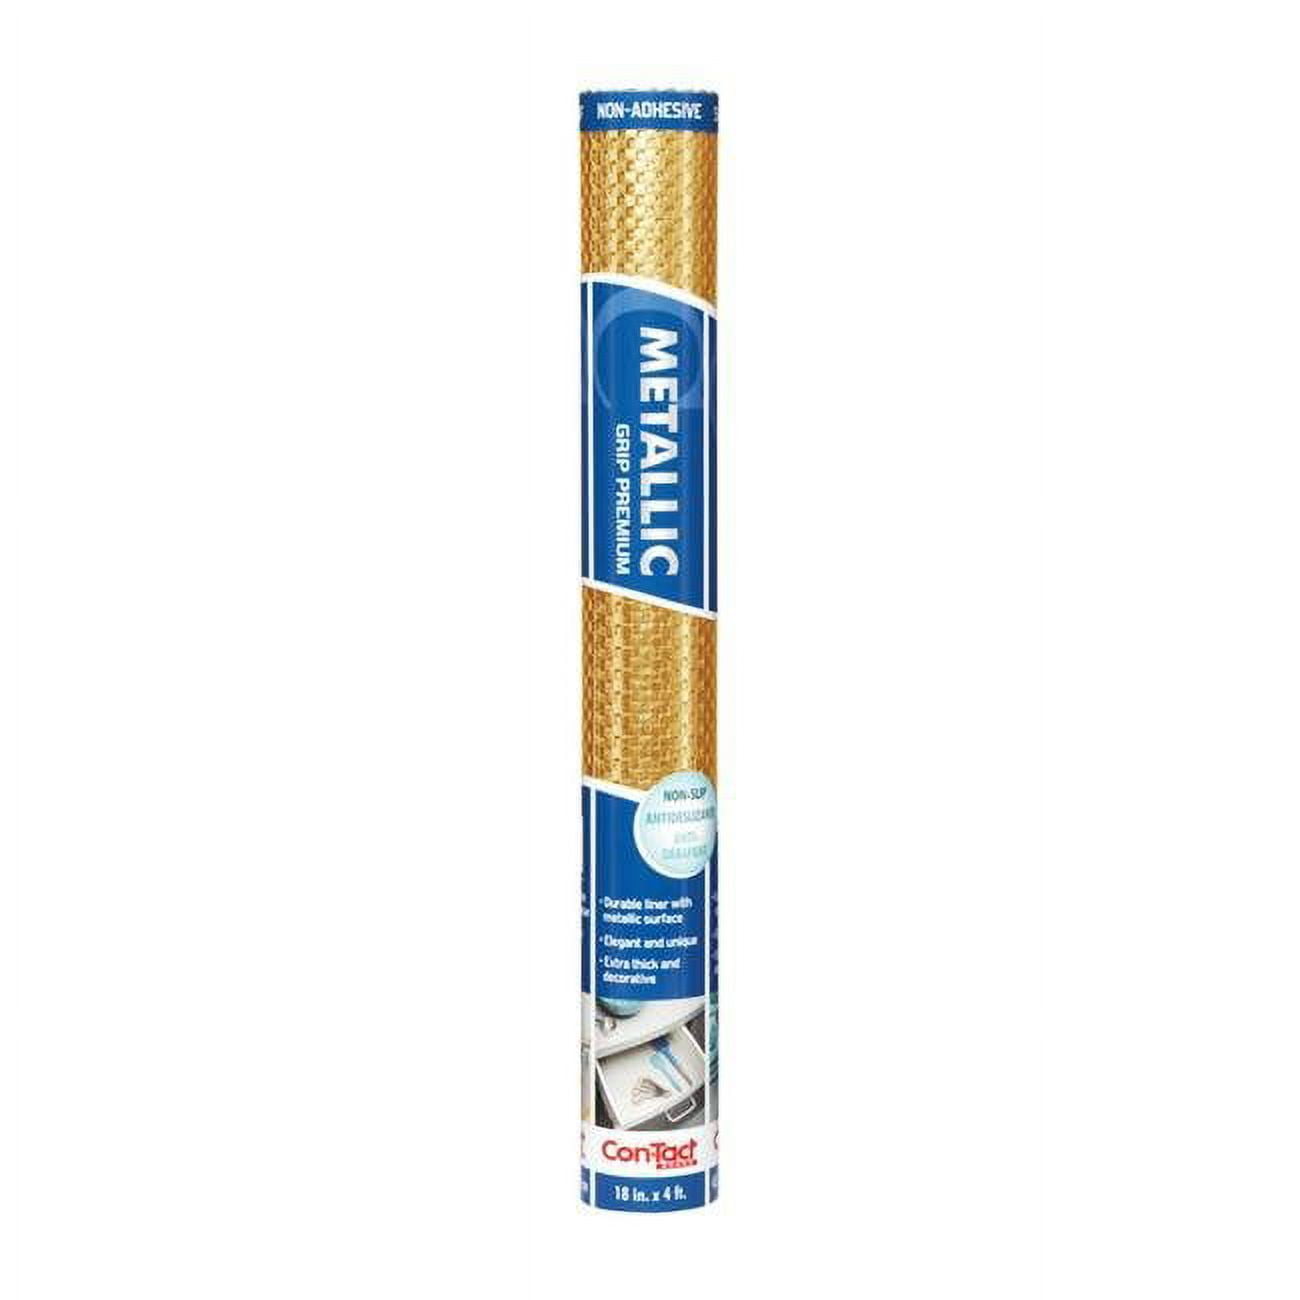 Picture of Con-Tact 6515696 4 ft. x 18 in. Grip Premium Gold Non Adhesive Shelf Liner